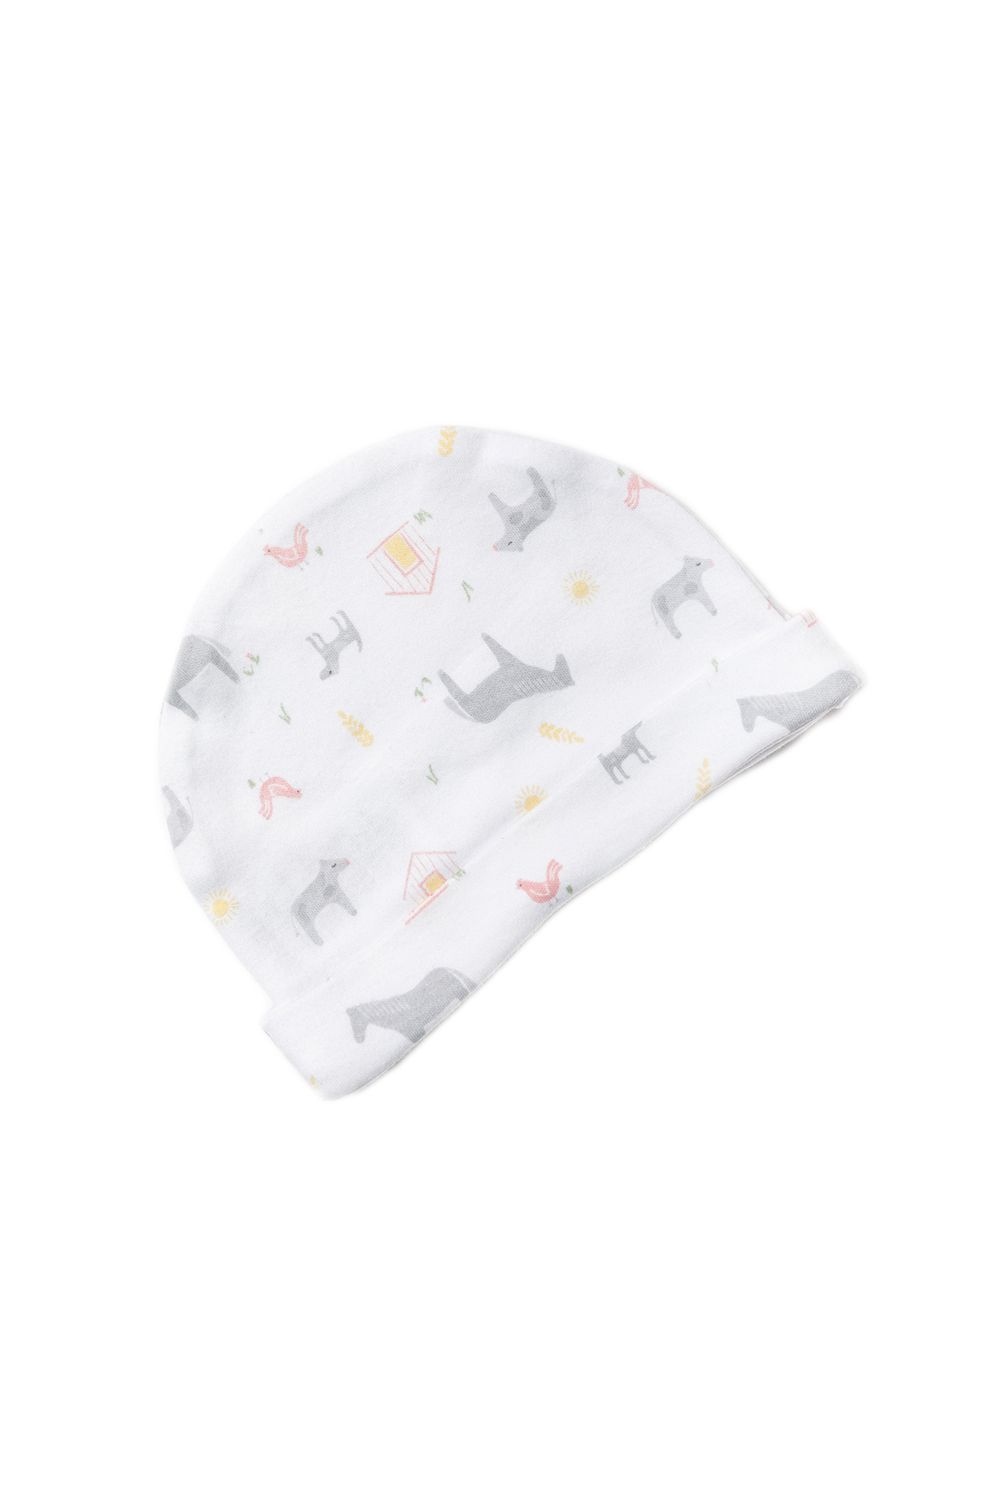 This Rock a Bye Baby Boutique ten-piece set features an adorable farm themed print on each item. The set includes spotted bodysuit with a farm animal motif, footed joggers and hat, a hooded blanket, a matching bib, and a cuddly cow toy, and three washcloths. The set also comes with a matching gift tag, to add a personal touch. Each item in the set is cotton with popper fastenings, keeping your little one comfortable. This set is the perfect gift set for the little one in your life.